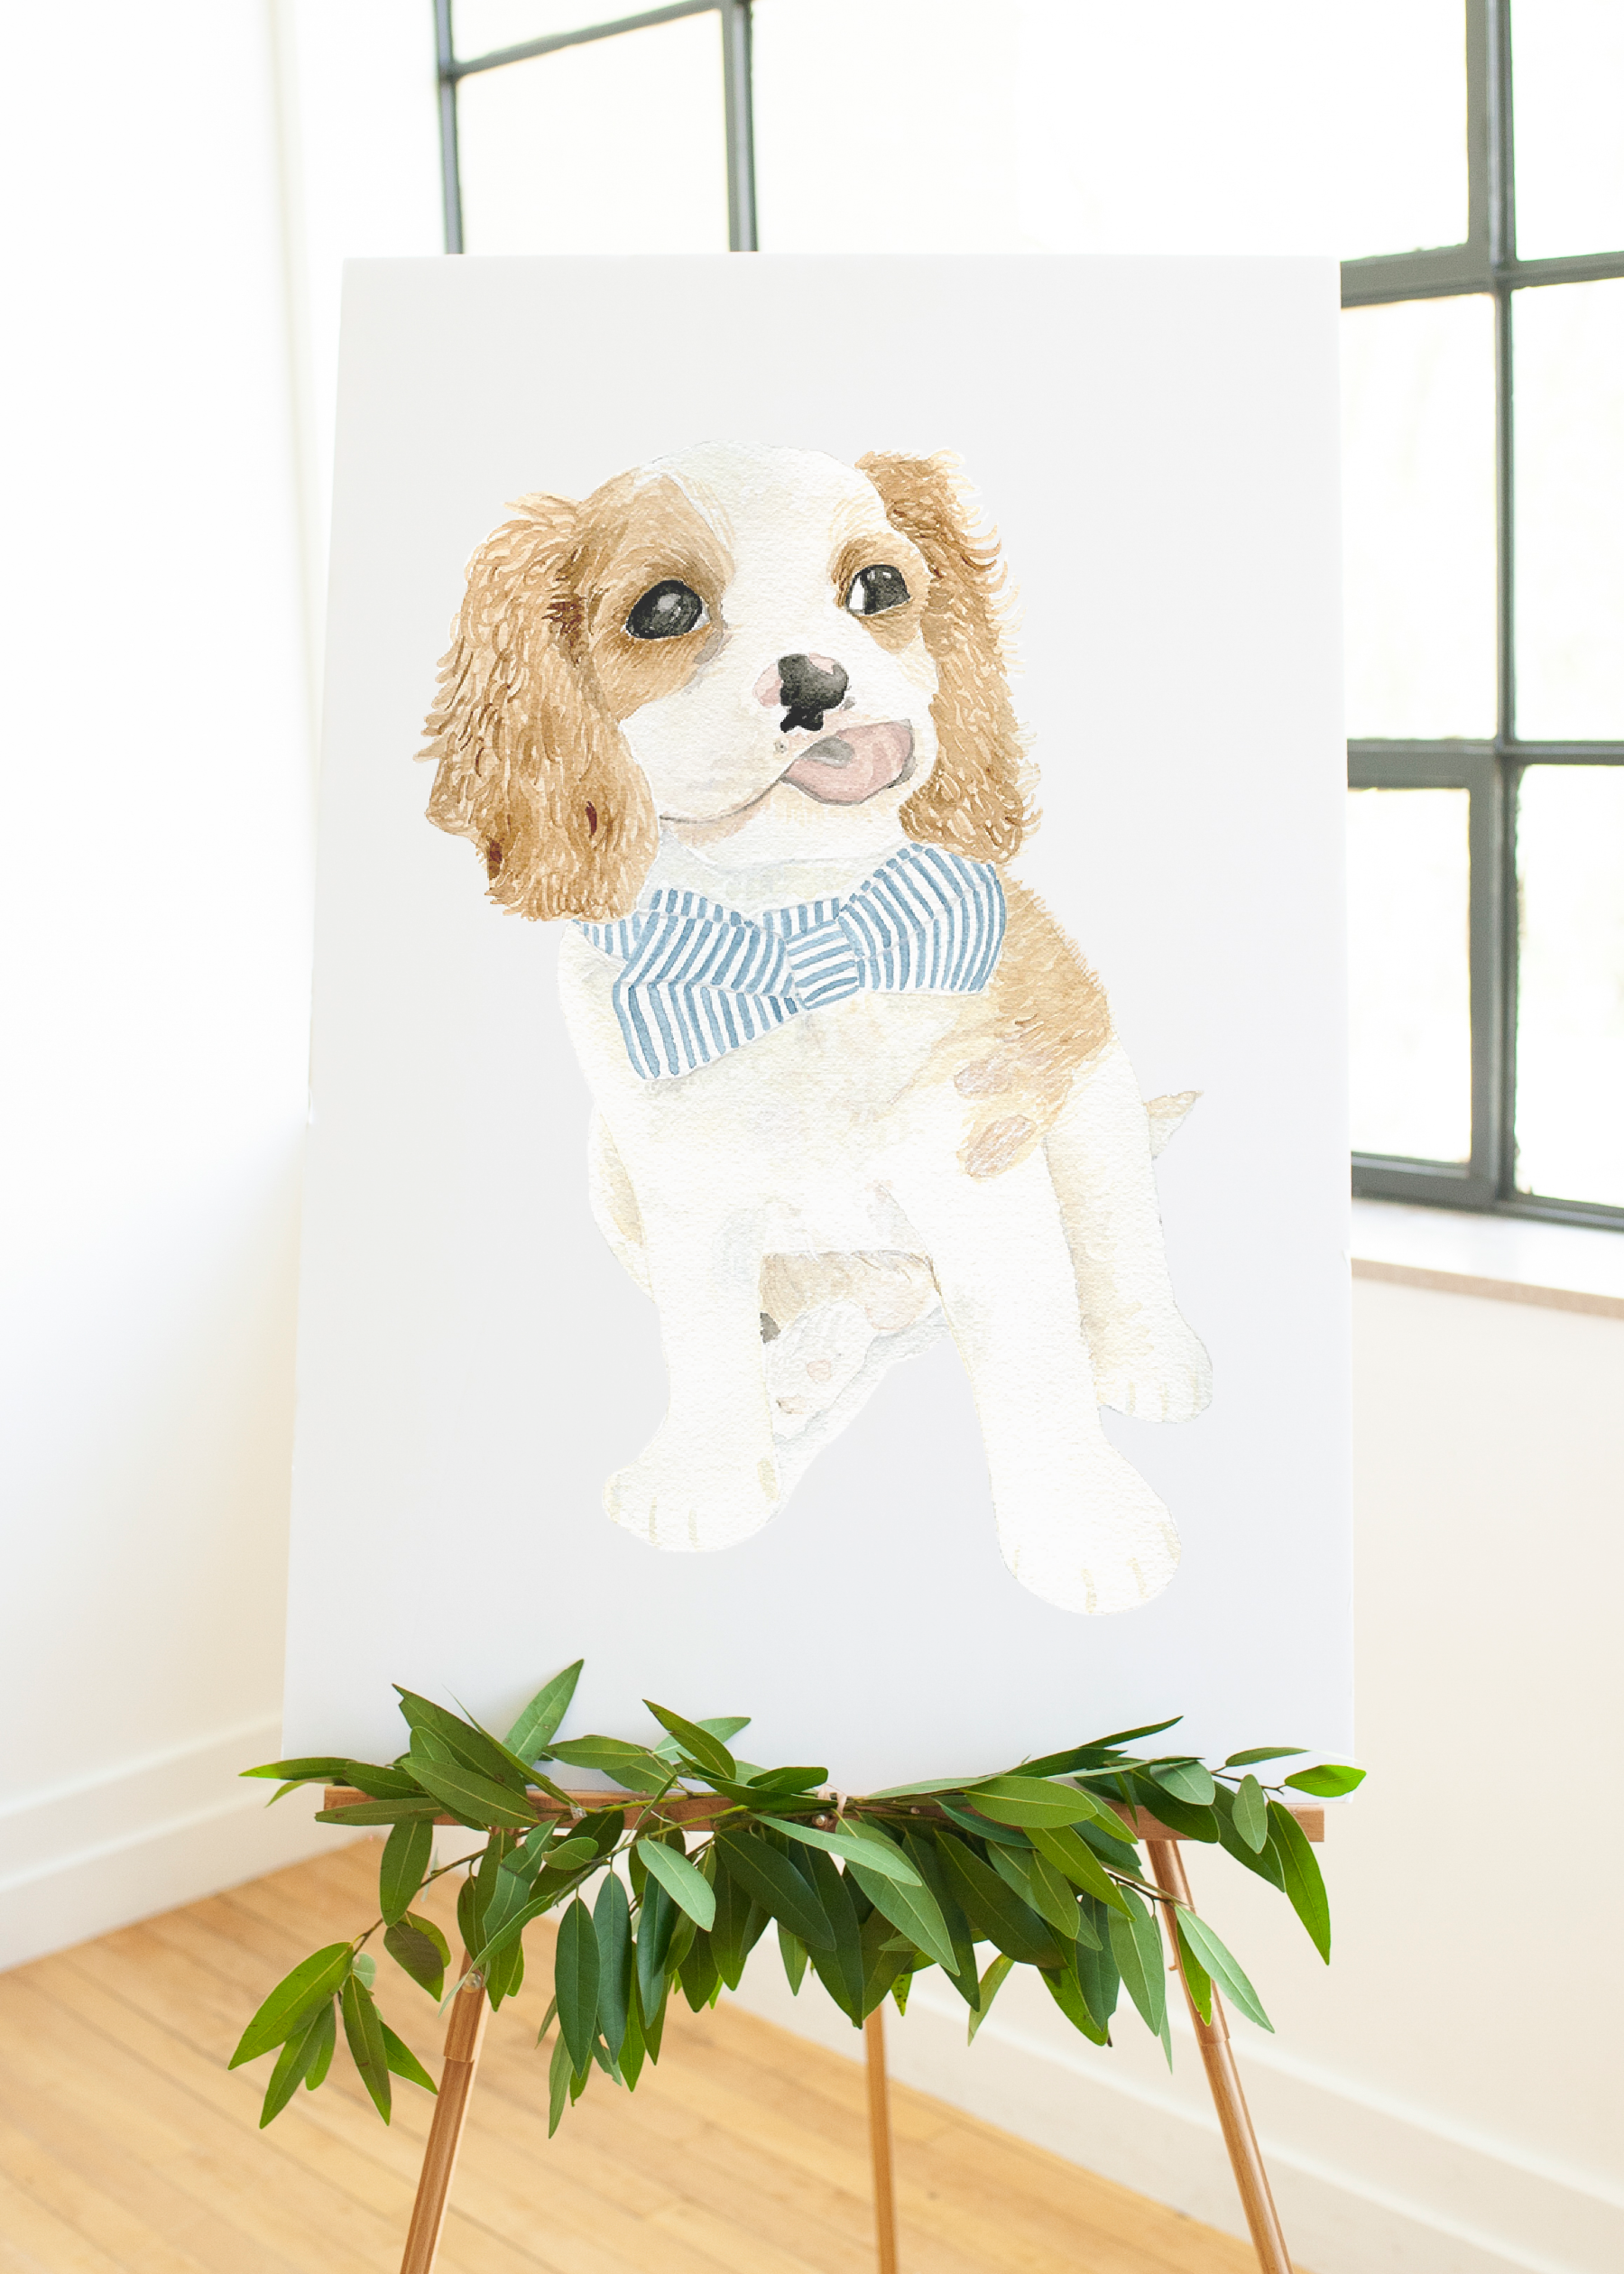 A dog portrait canvas by The Welcoming District.